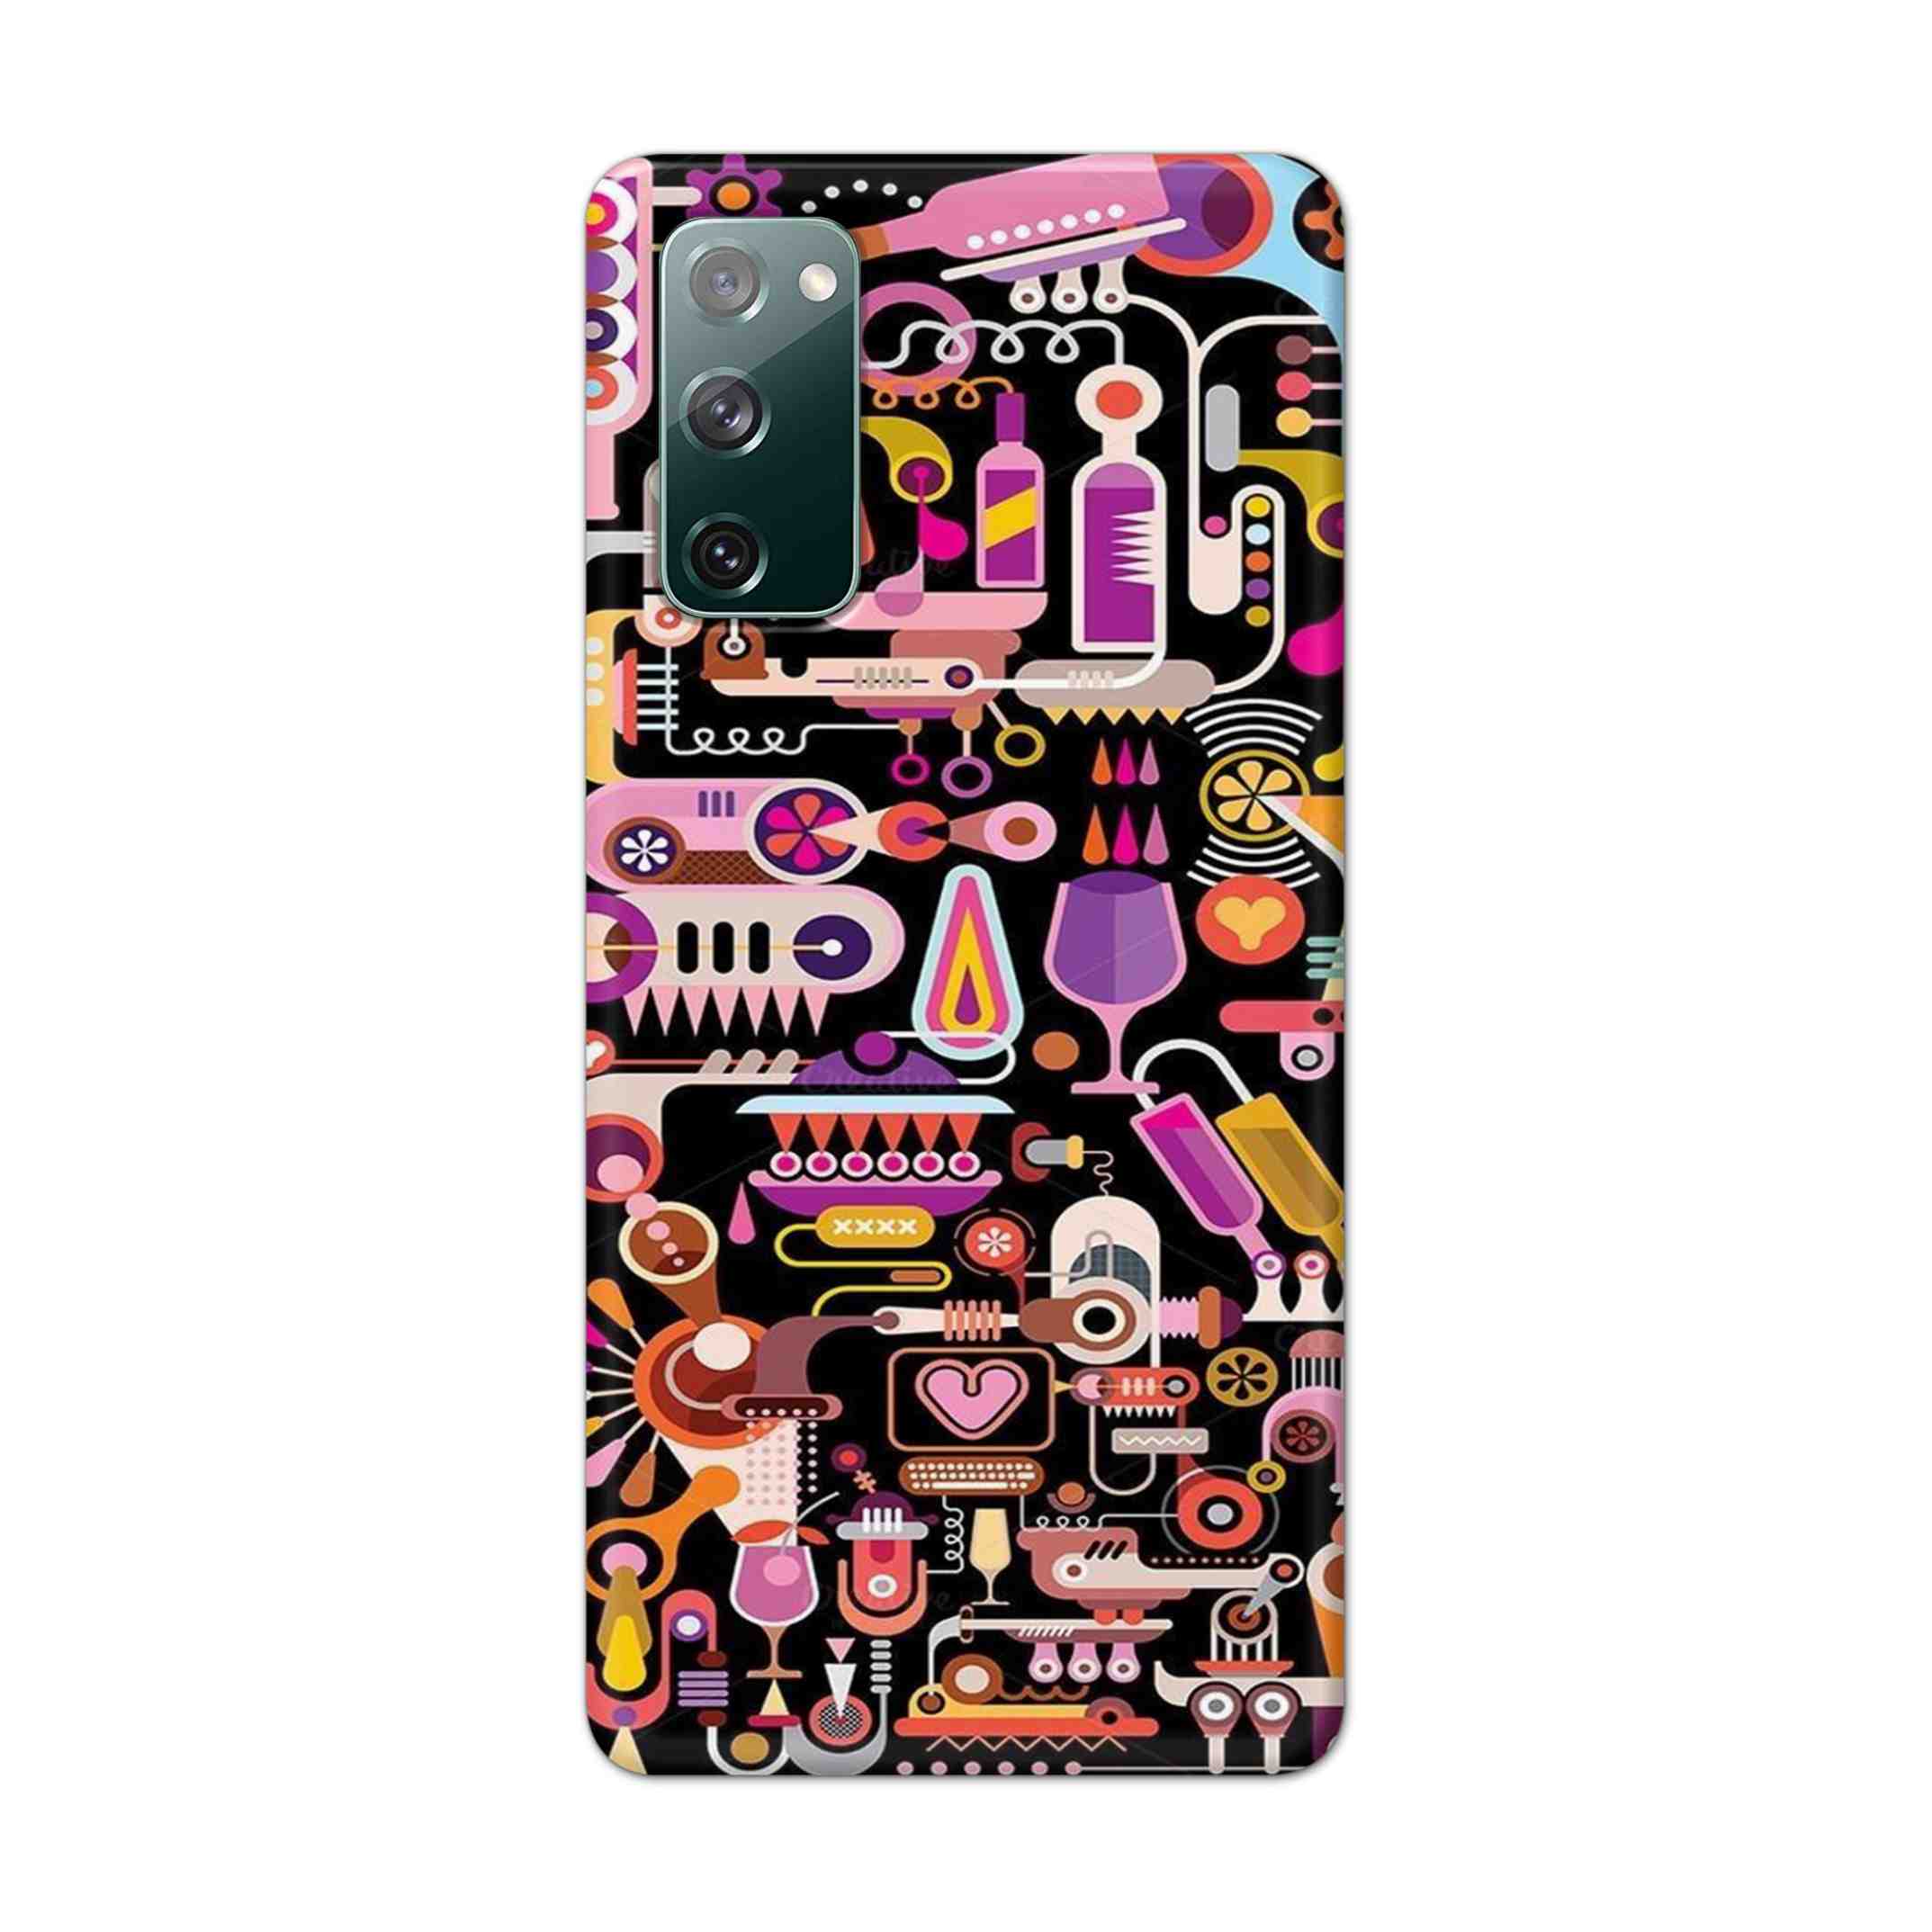 Buy Lab Art Hard Back Mobile Phone Case Cover For Samsung Galaxy S20 FE Online